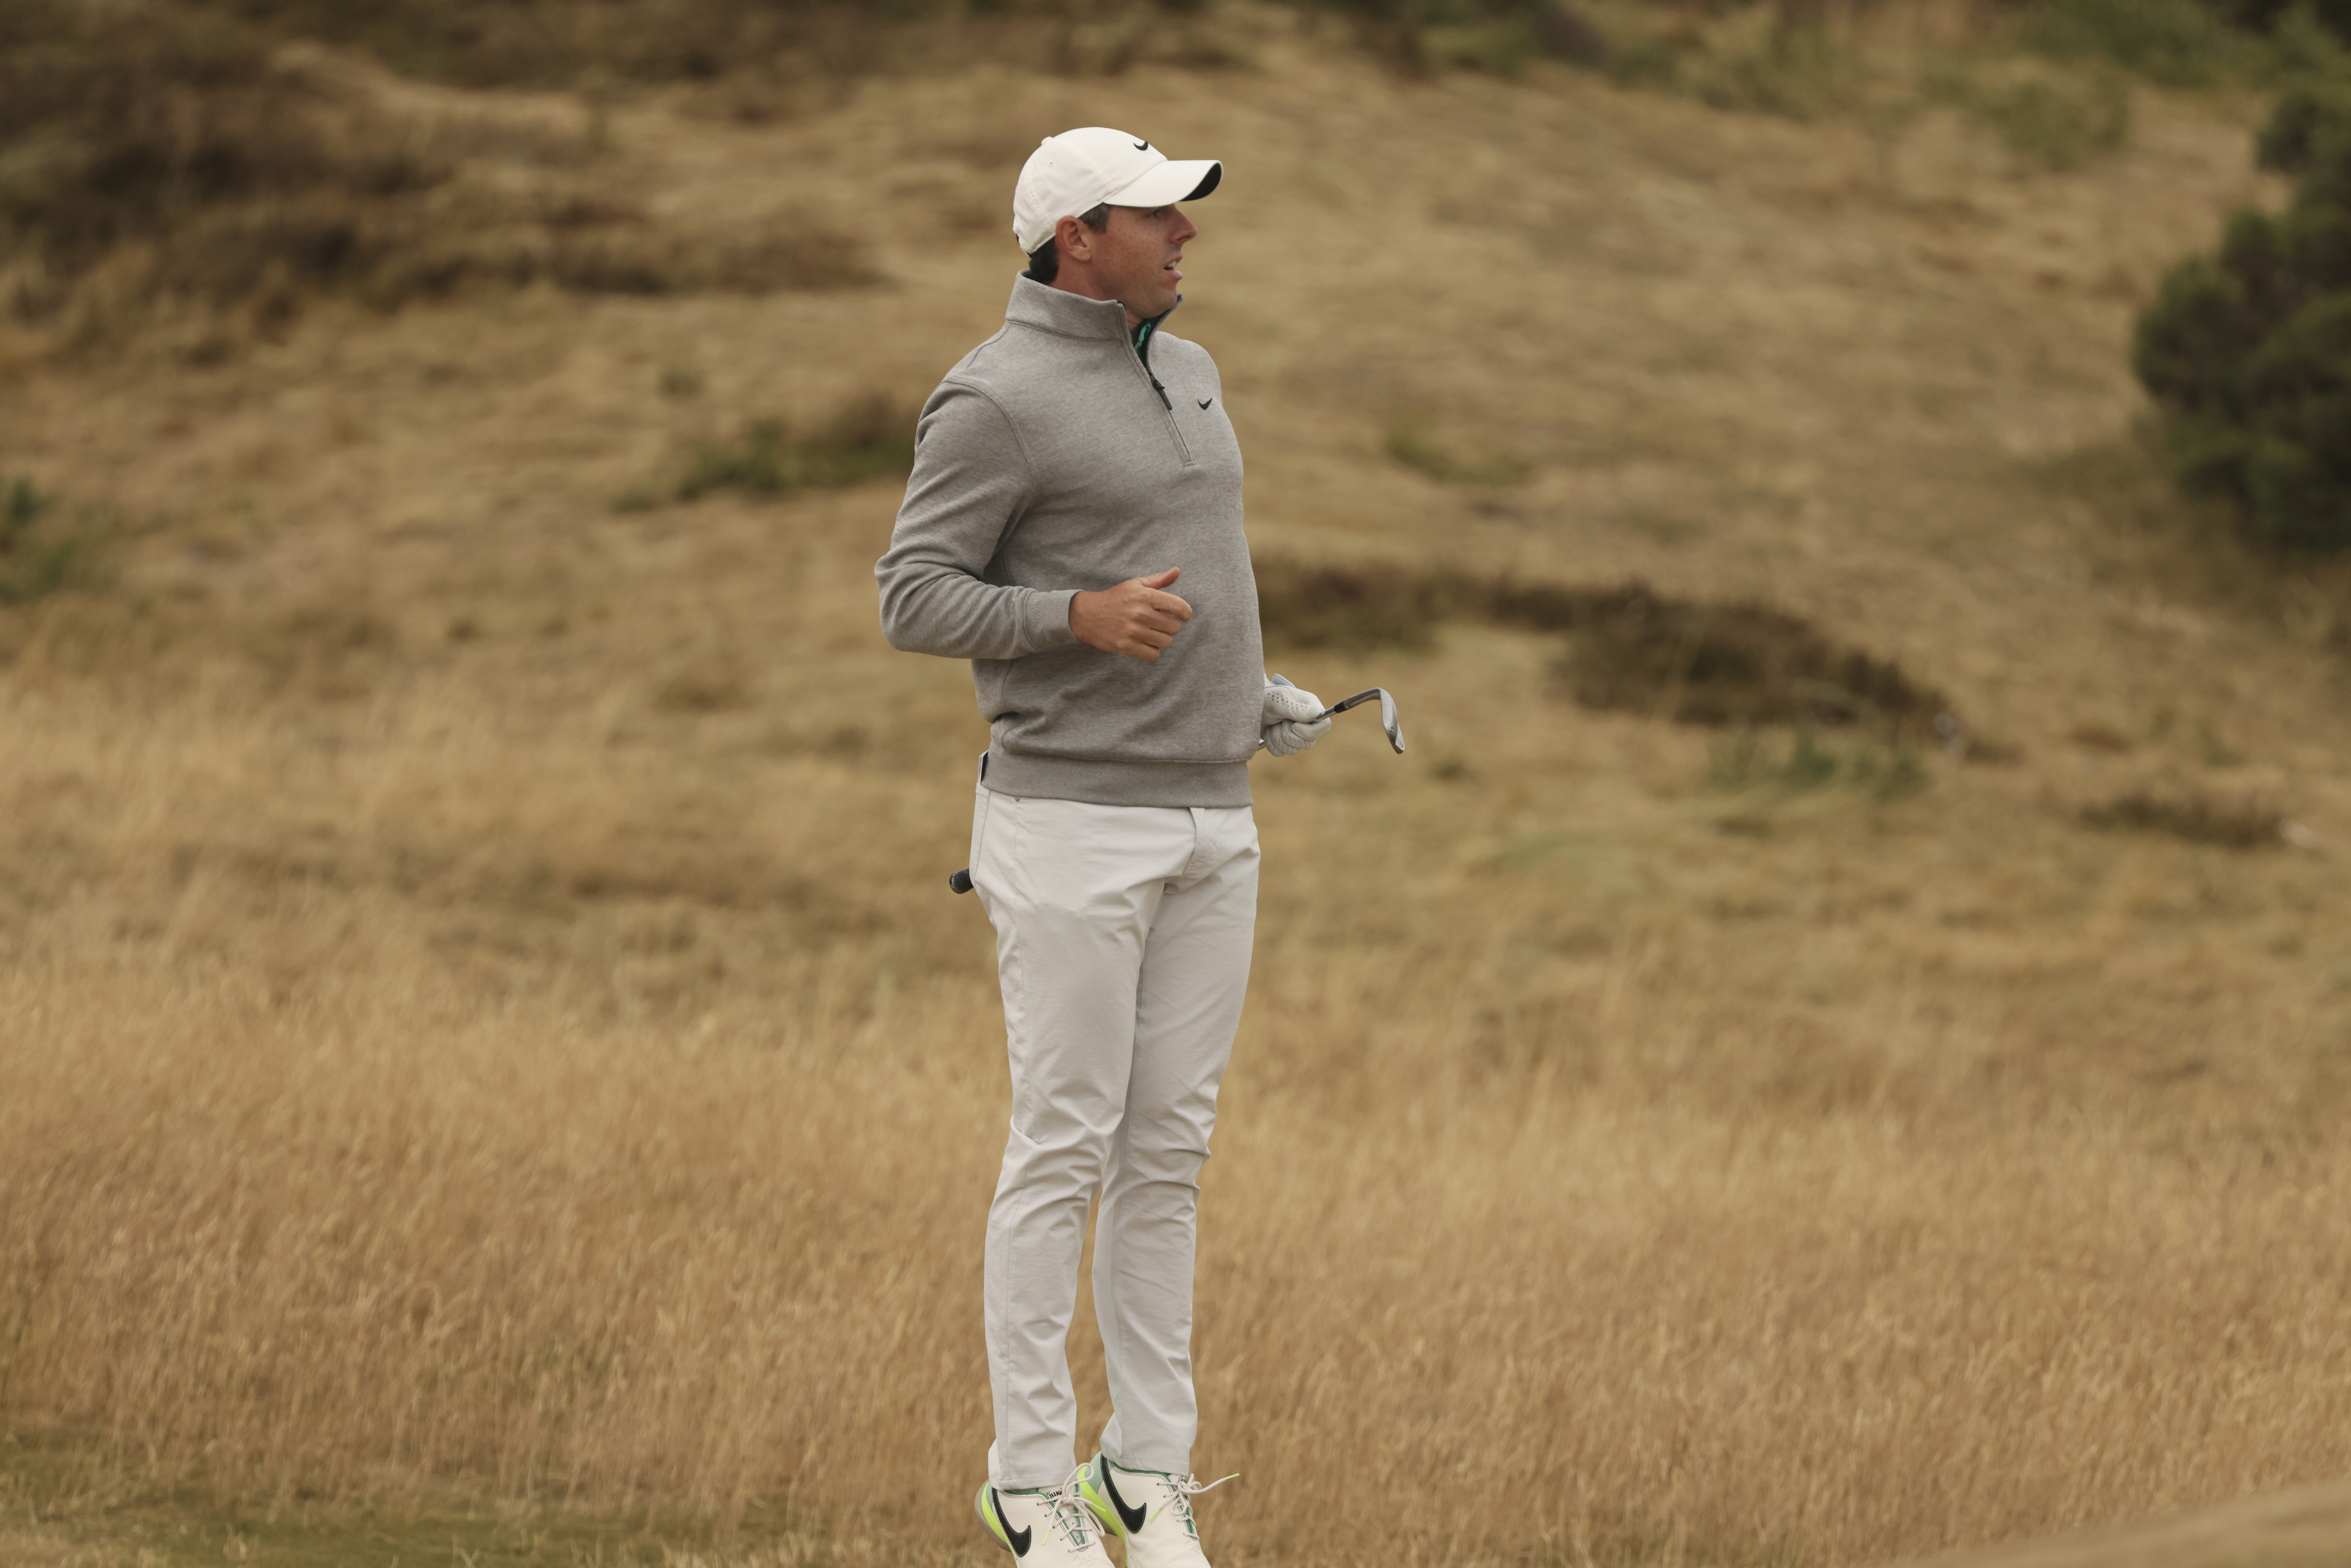 British Open 2022 Final Round free live stream How to watch, tee times Rory McIlroy, Viktor Hovland